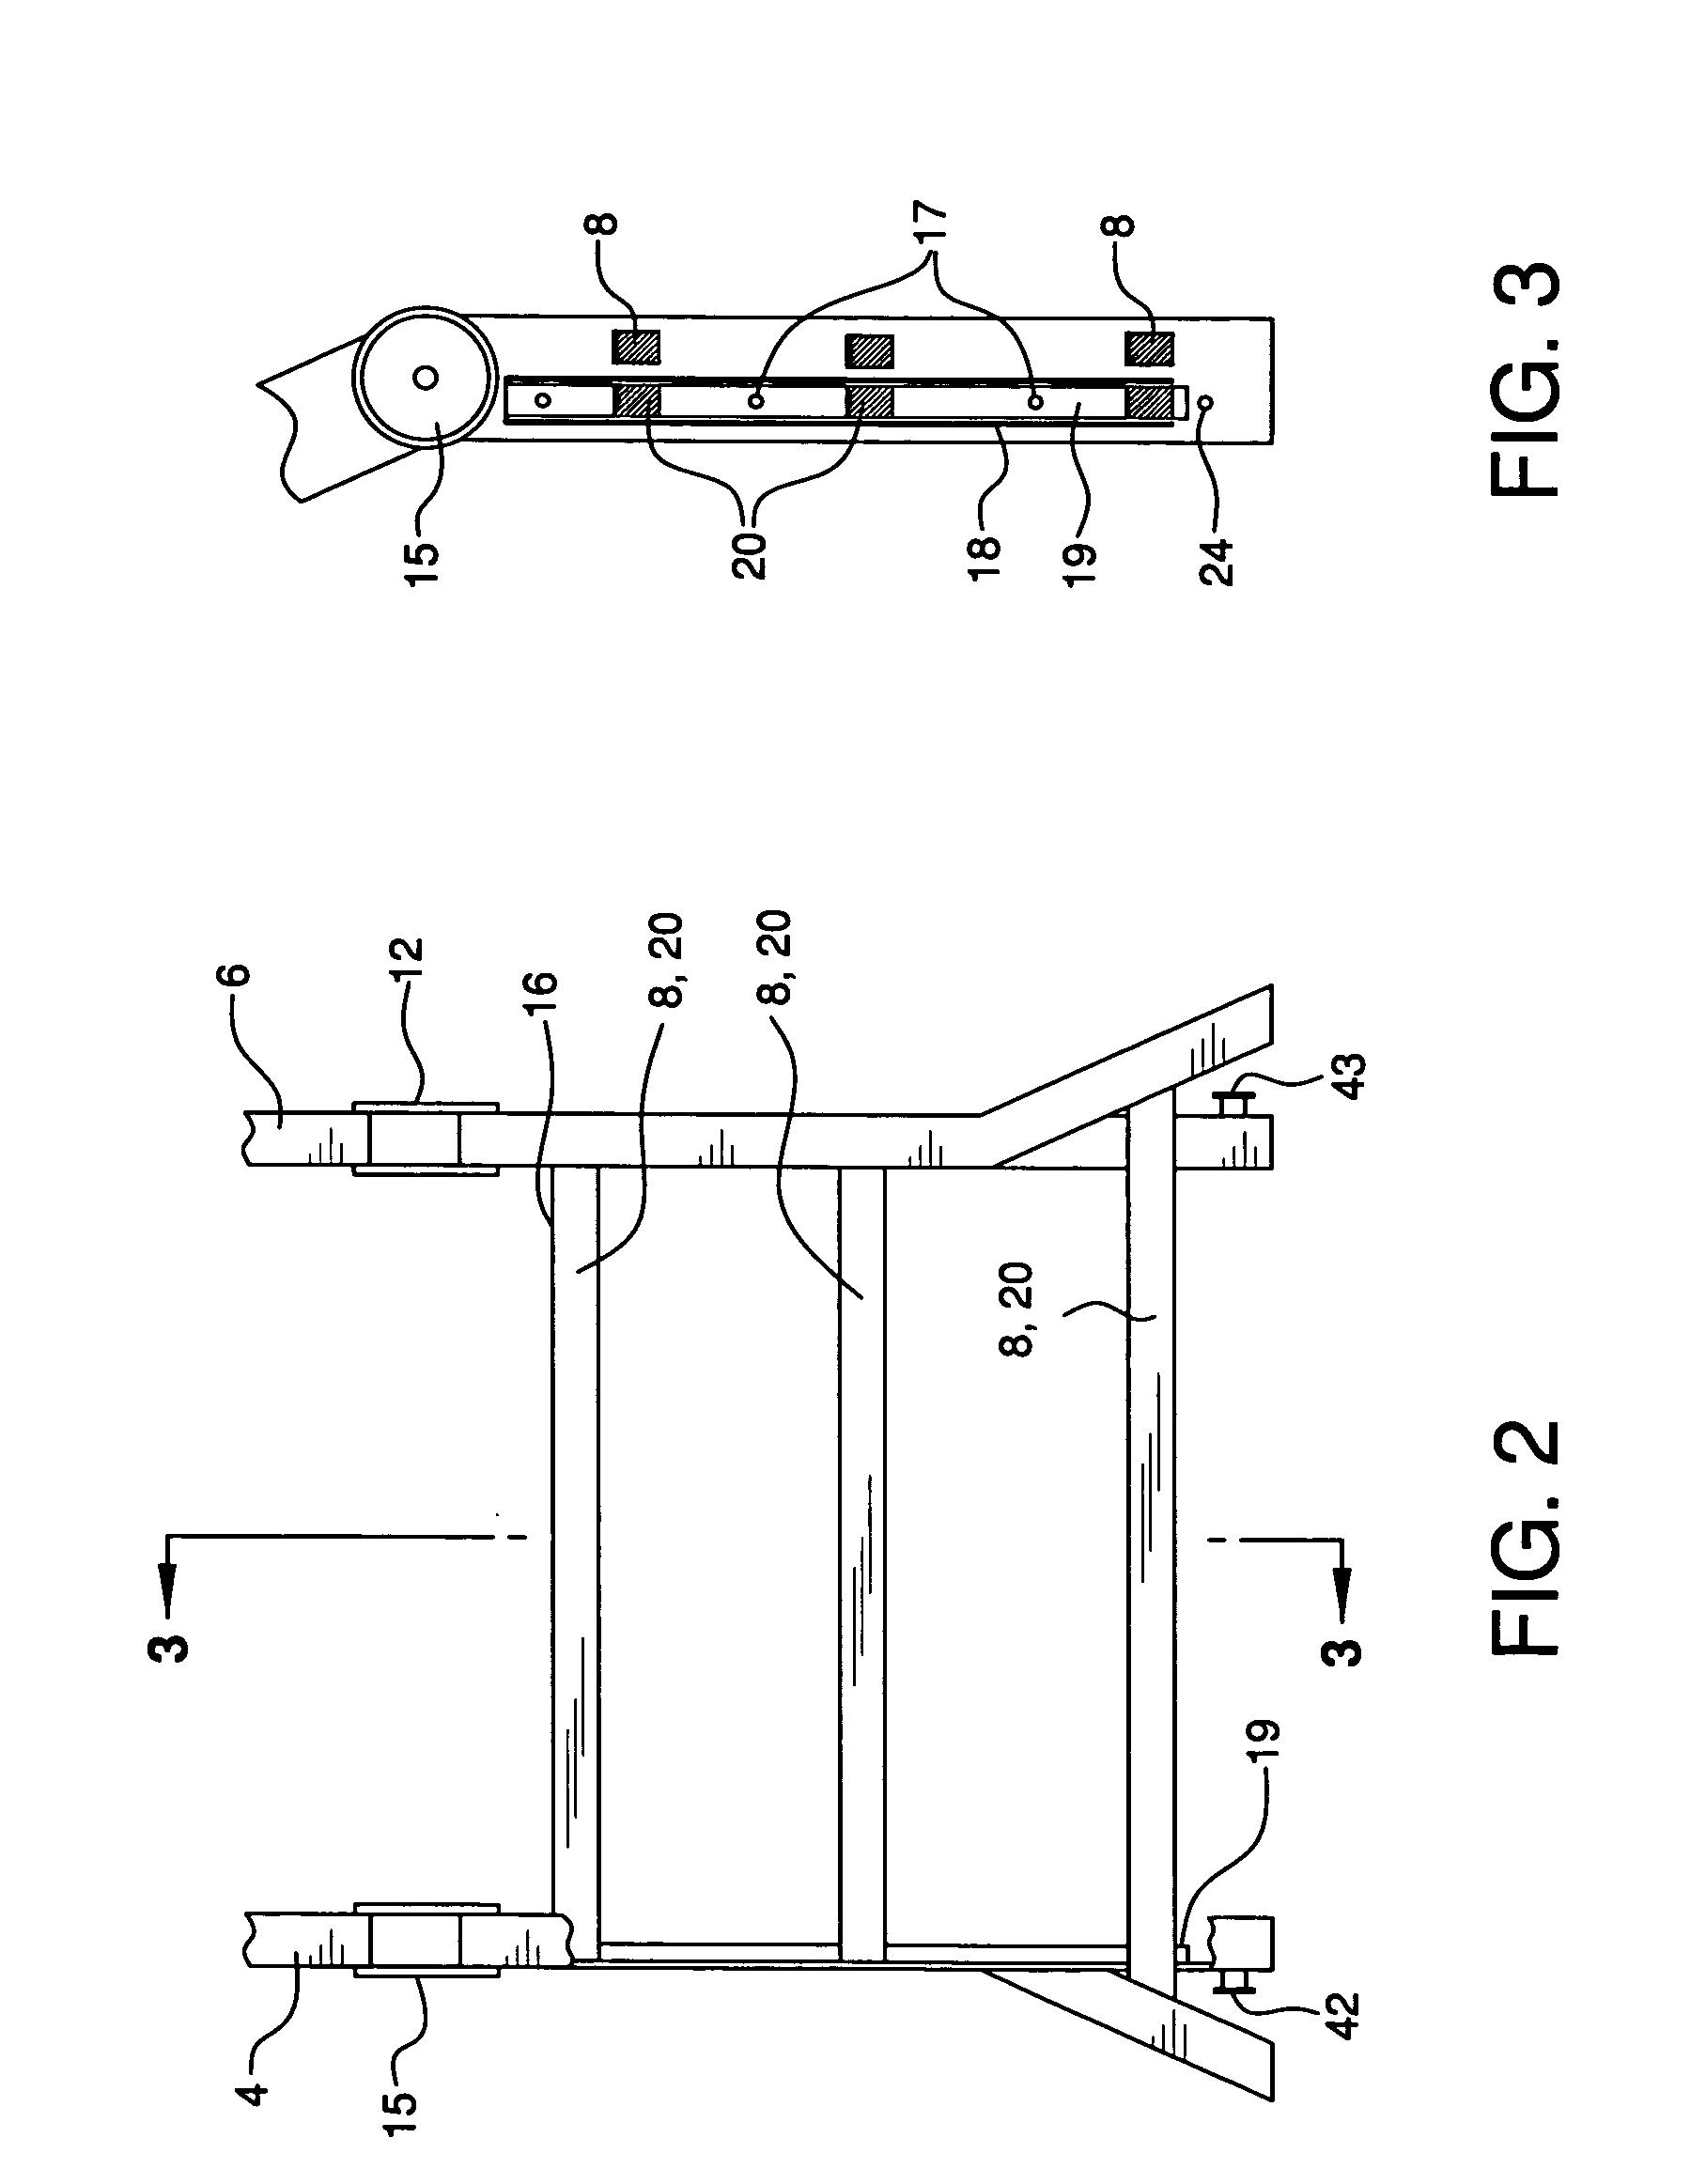 Portable vehicle ladder system and method